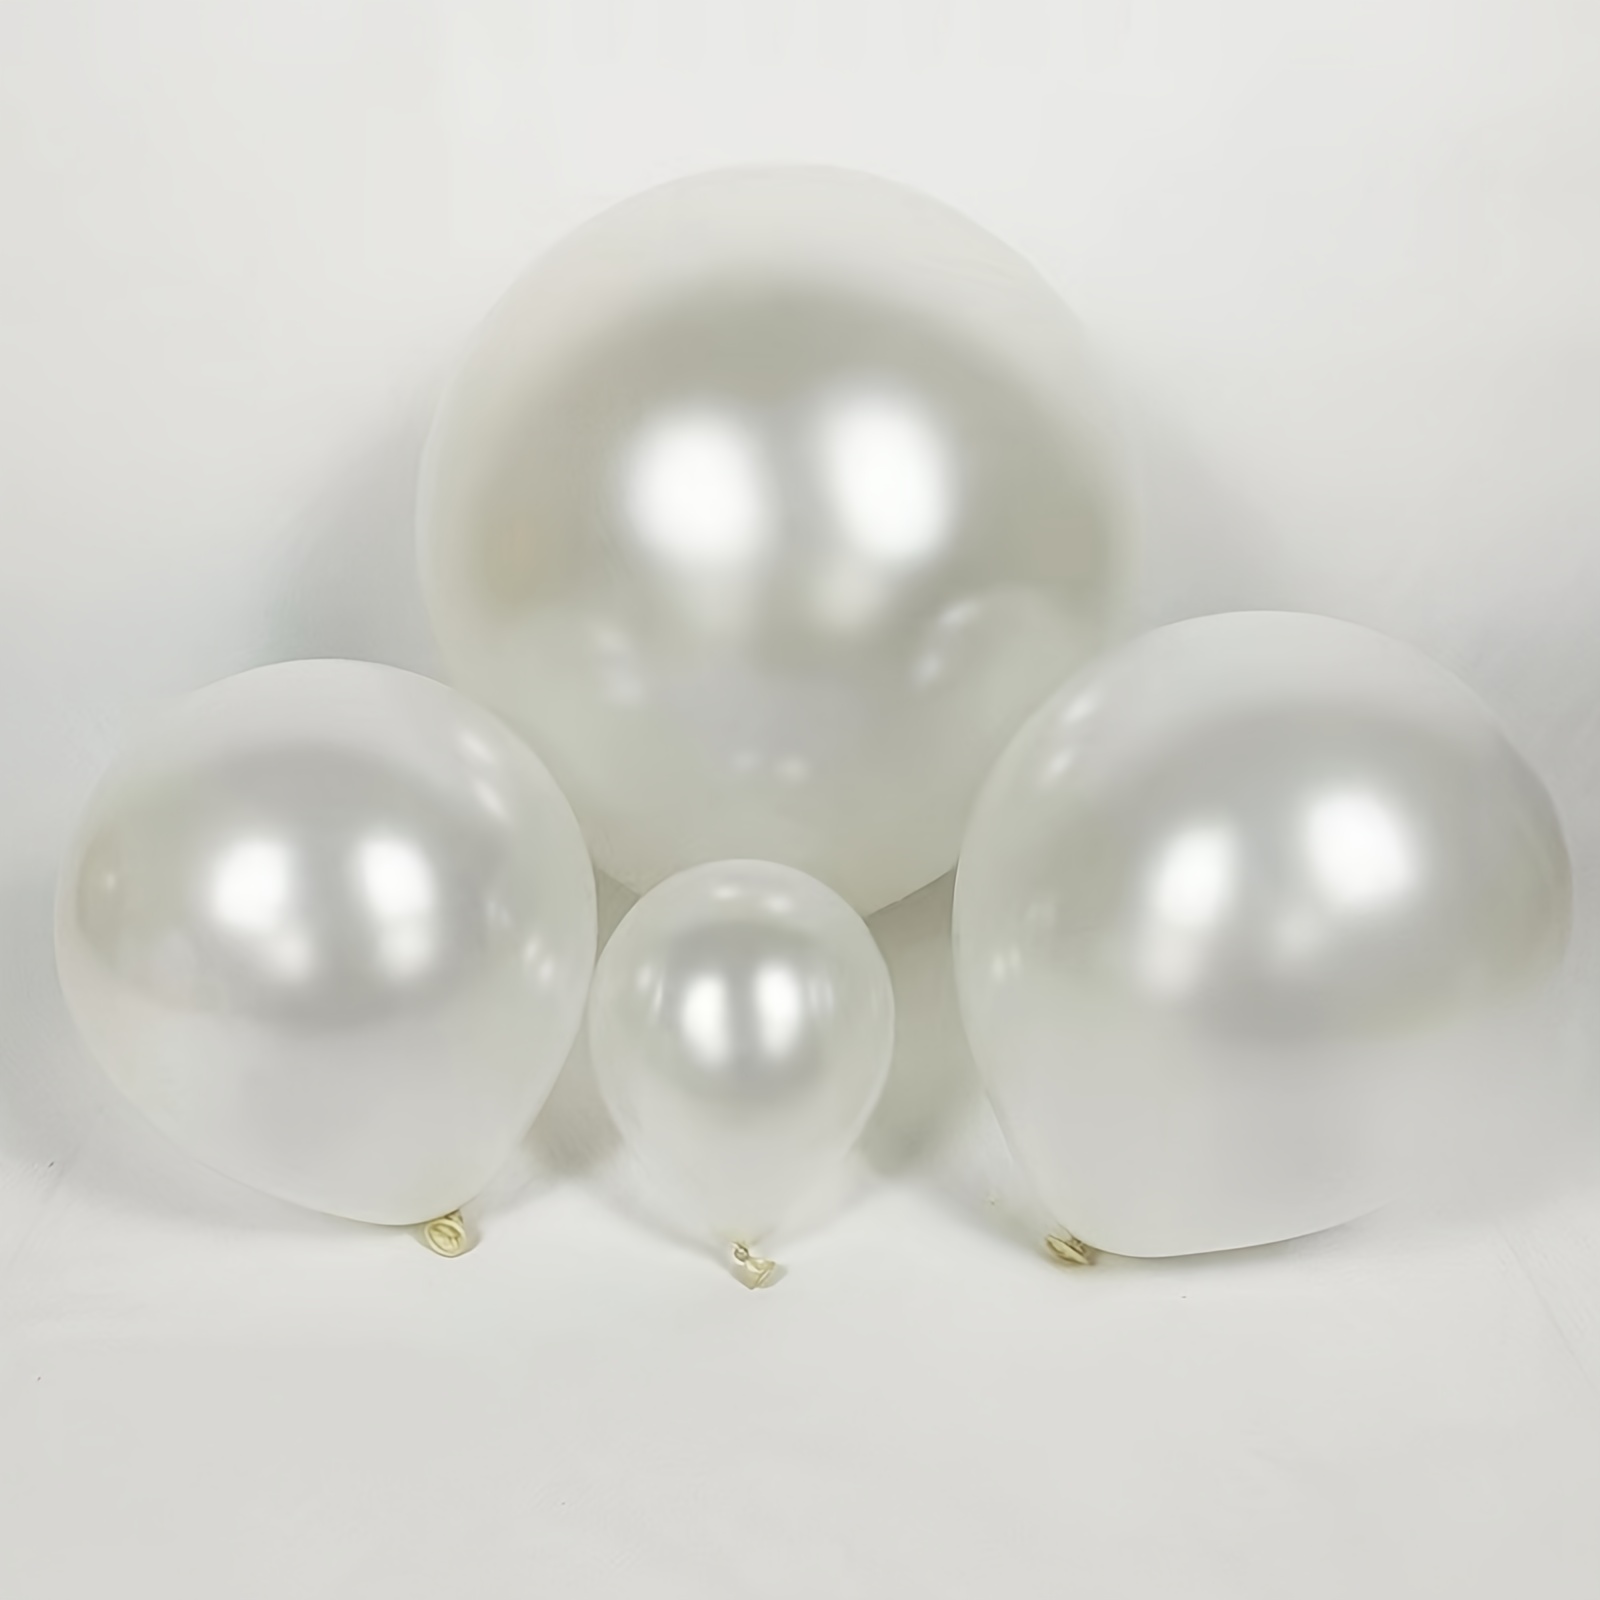 

20pcs, Pearl White Balloons, Very Suitable For Birthdays, Weddings, Valentine's Day, Thanksgiving, Christmas, New Year, Home Decoration, Balloon Parties Easter Gift